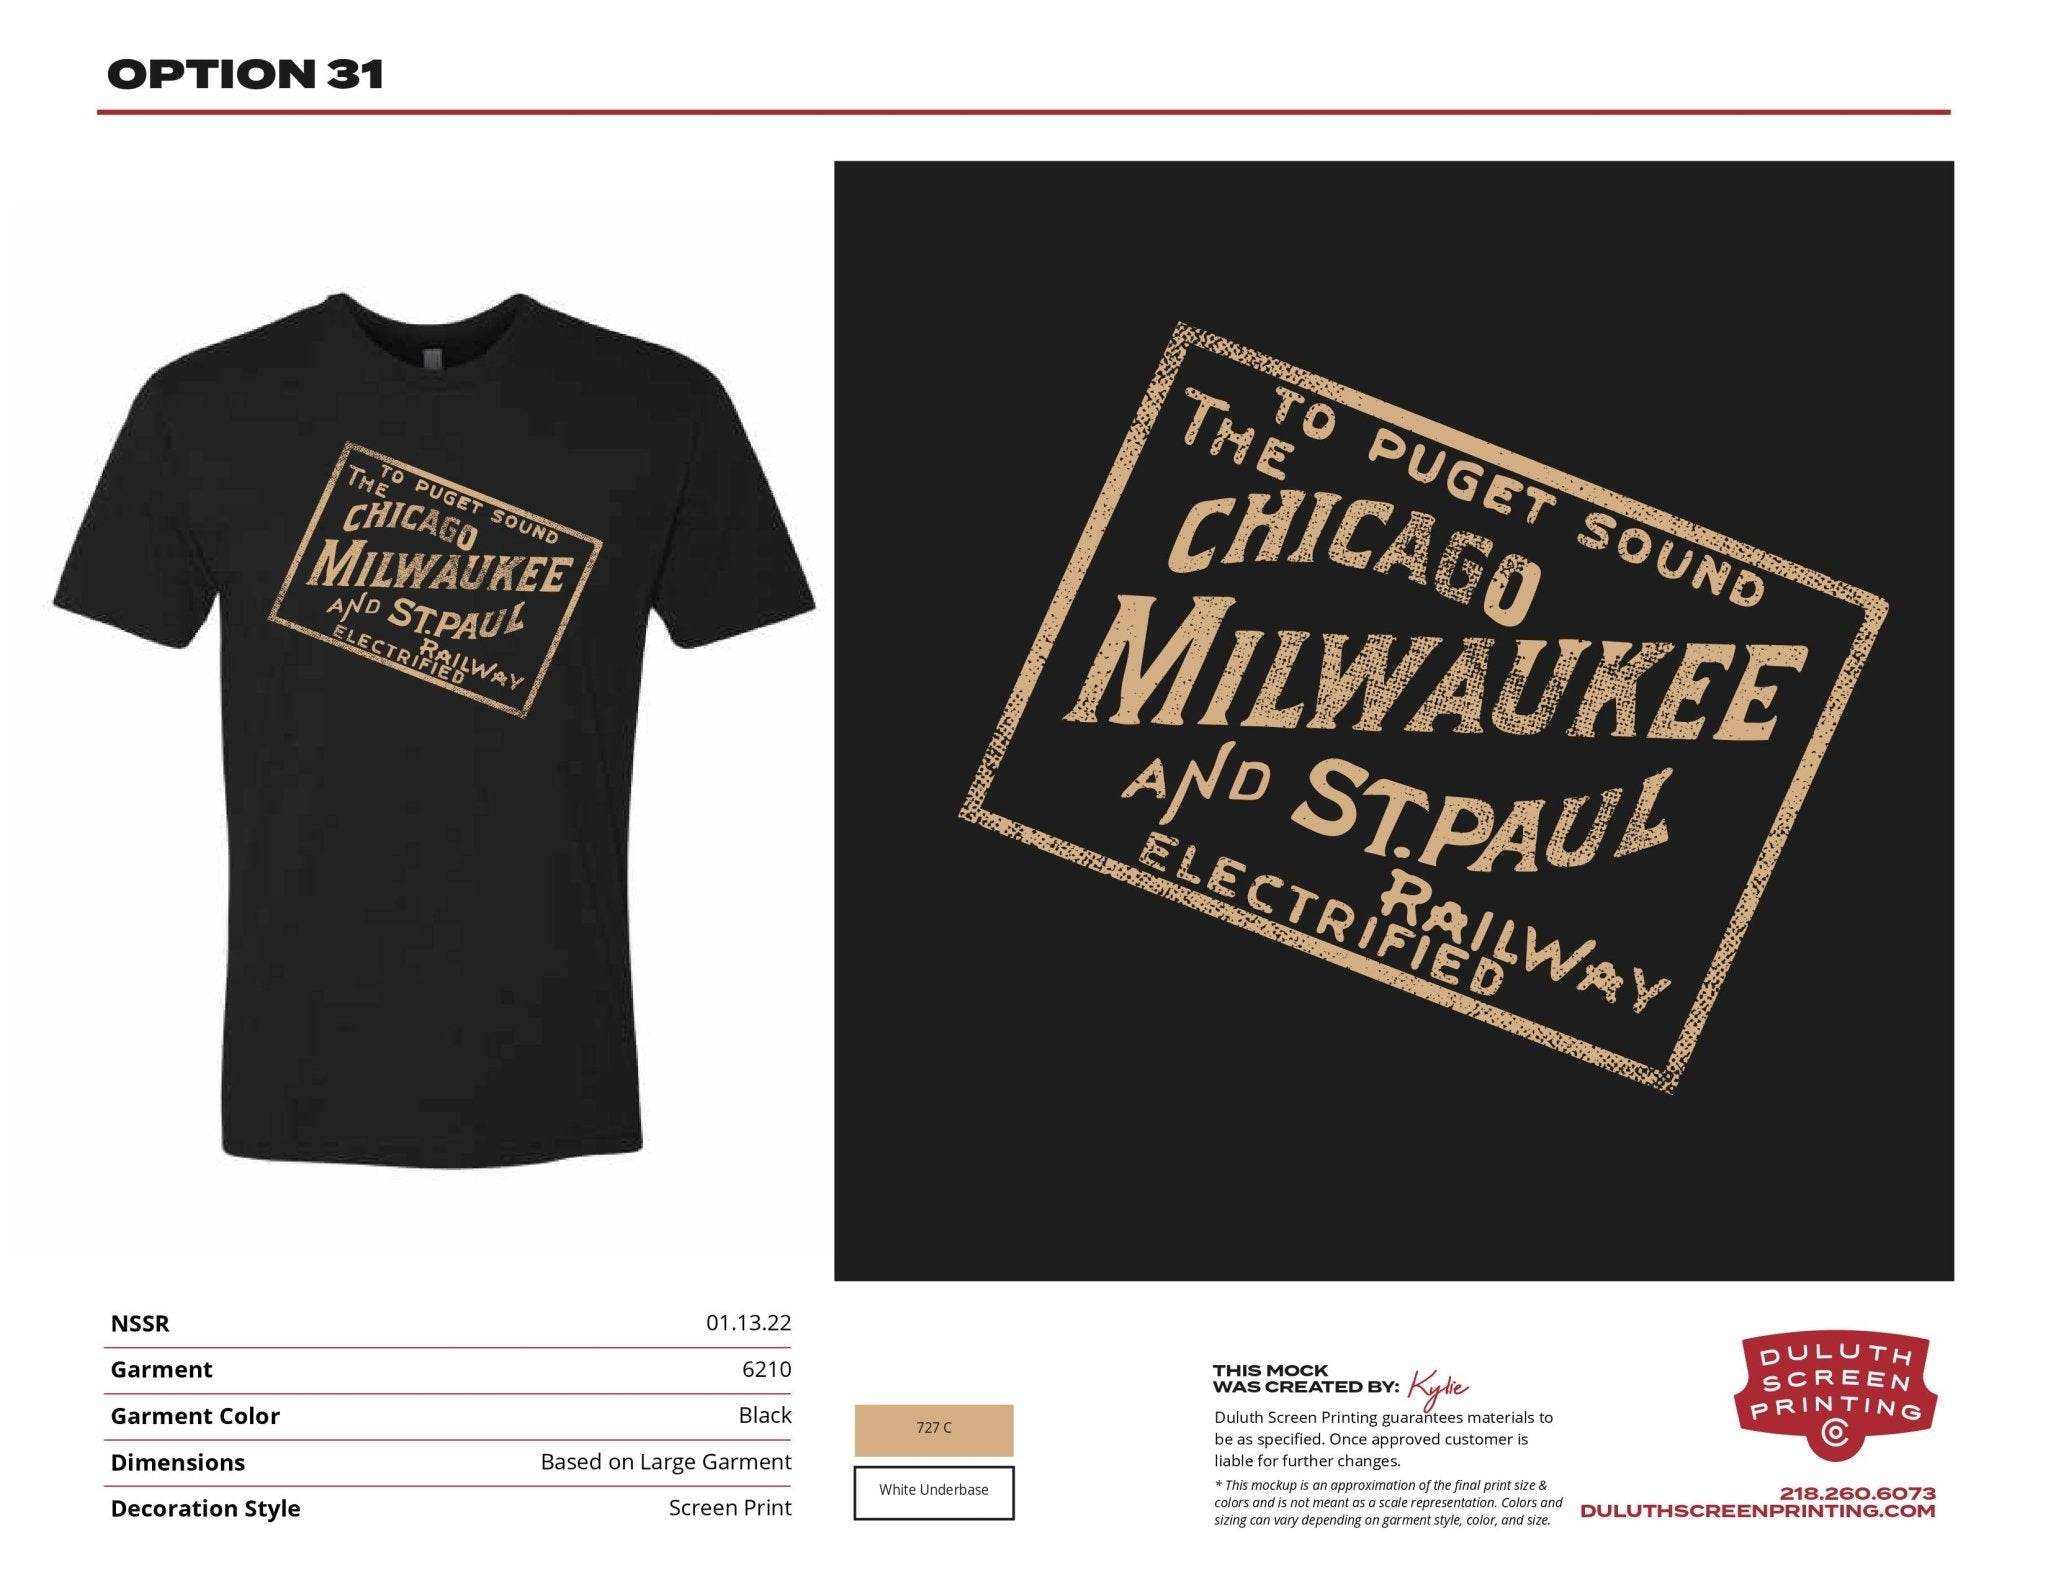 NSSRR Chicago & St. Paul Tee - Comfort Colors Heavyweight Tee - DSP On Demand